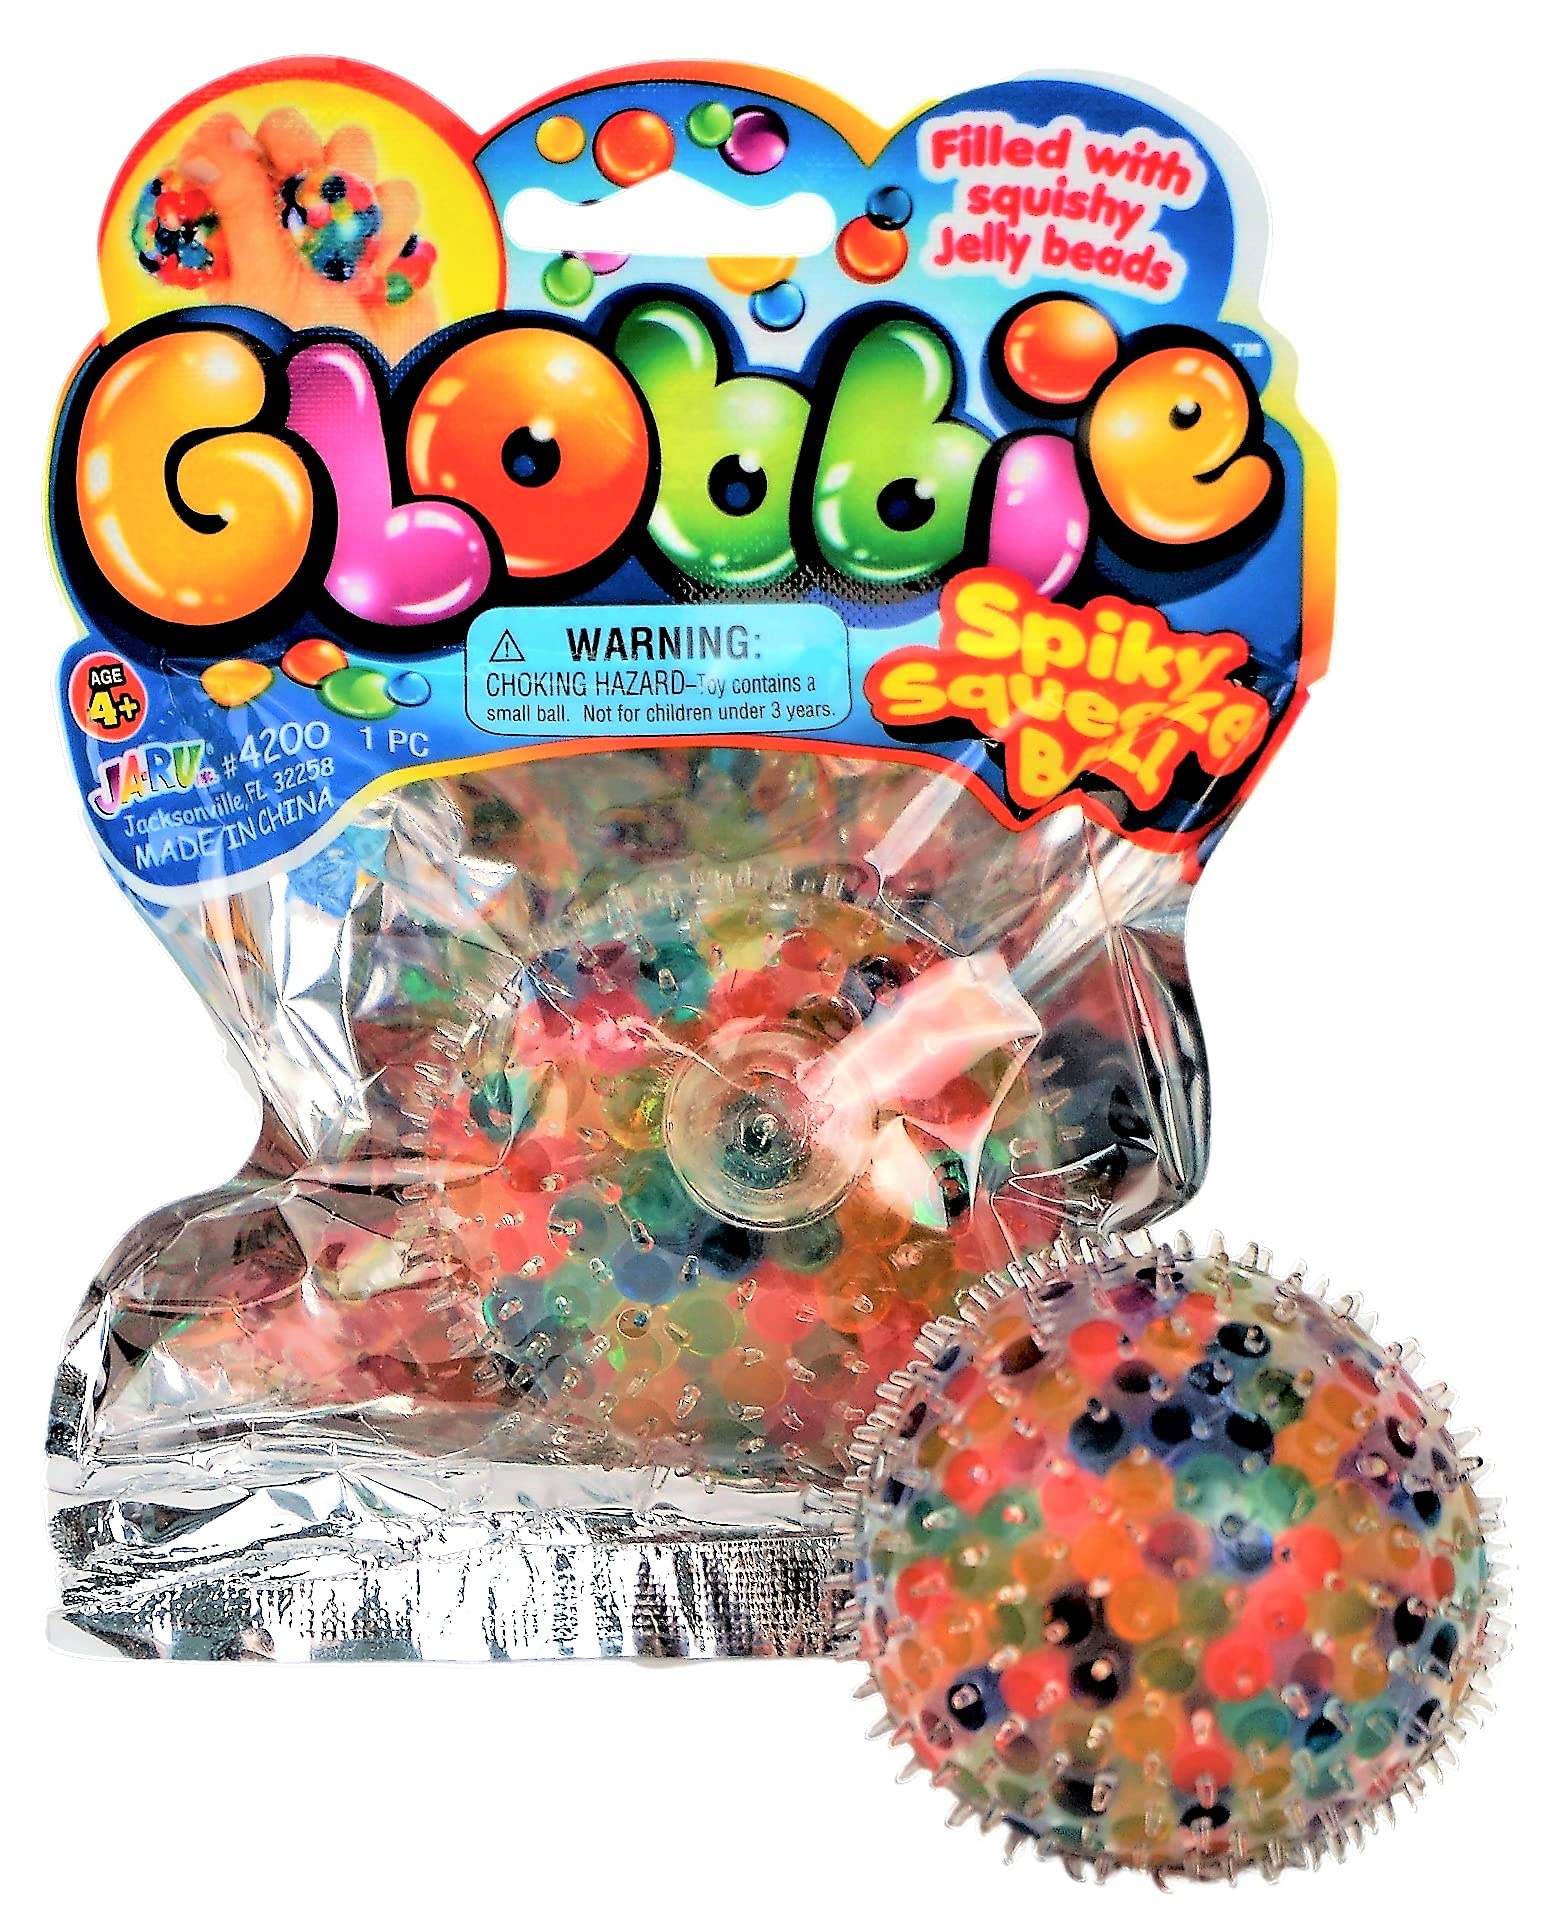 SQUEEZE CANDY BEADS BALL – Best Value Products